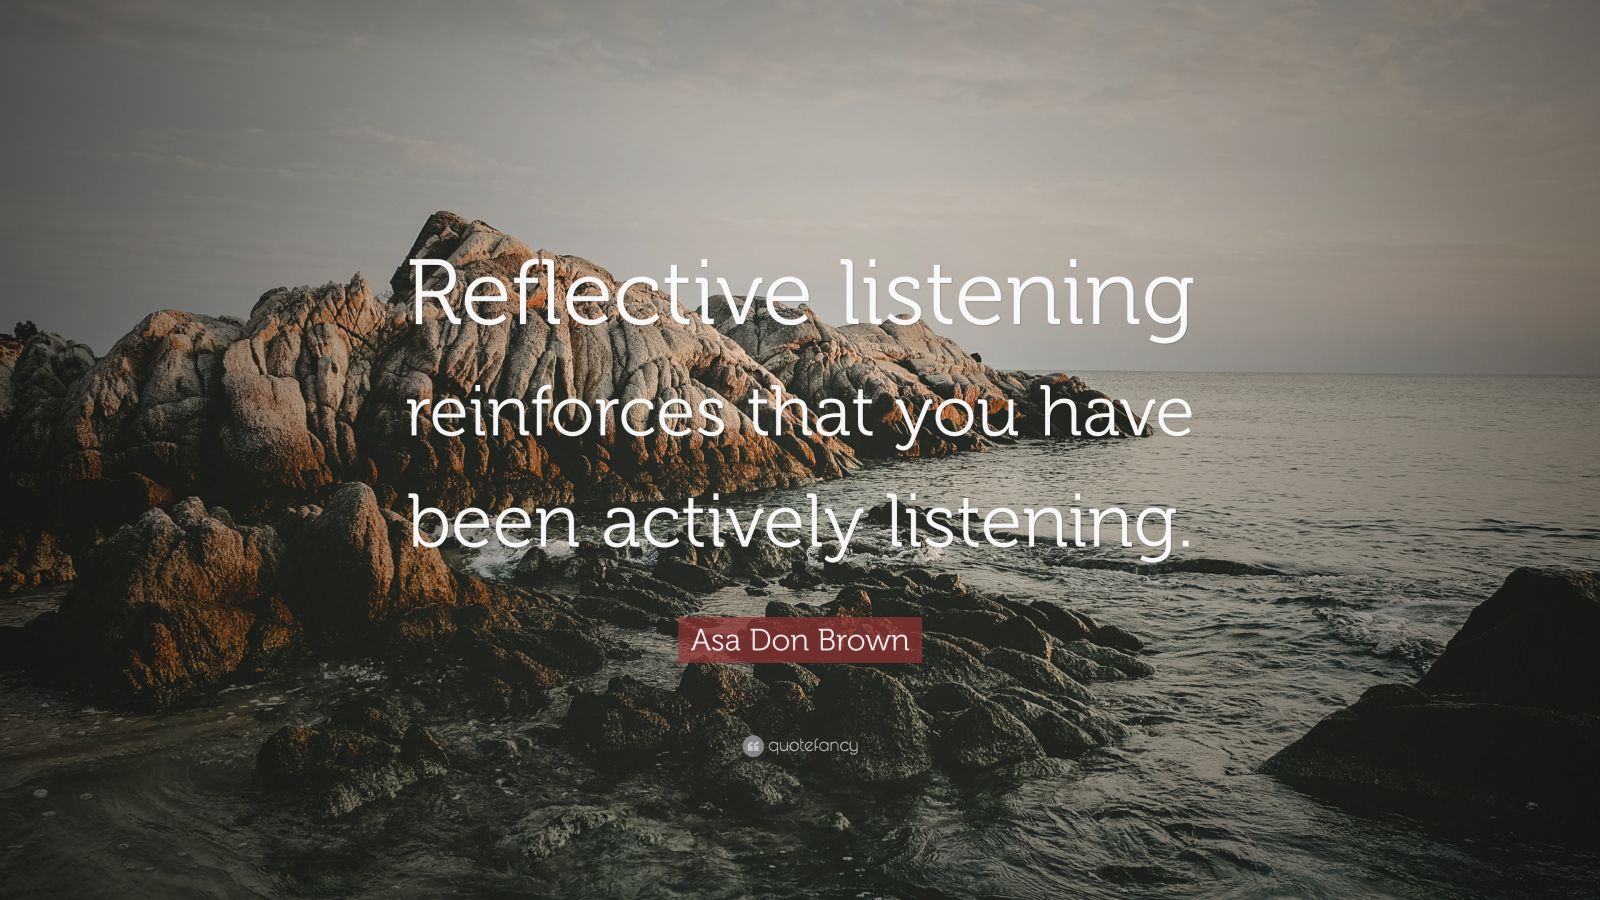 Asa Don Brown Quote: “Reflective listening reinforces that you have ...